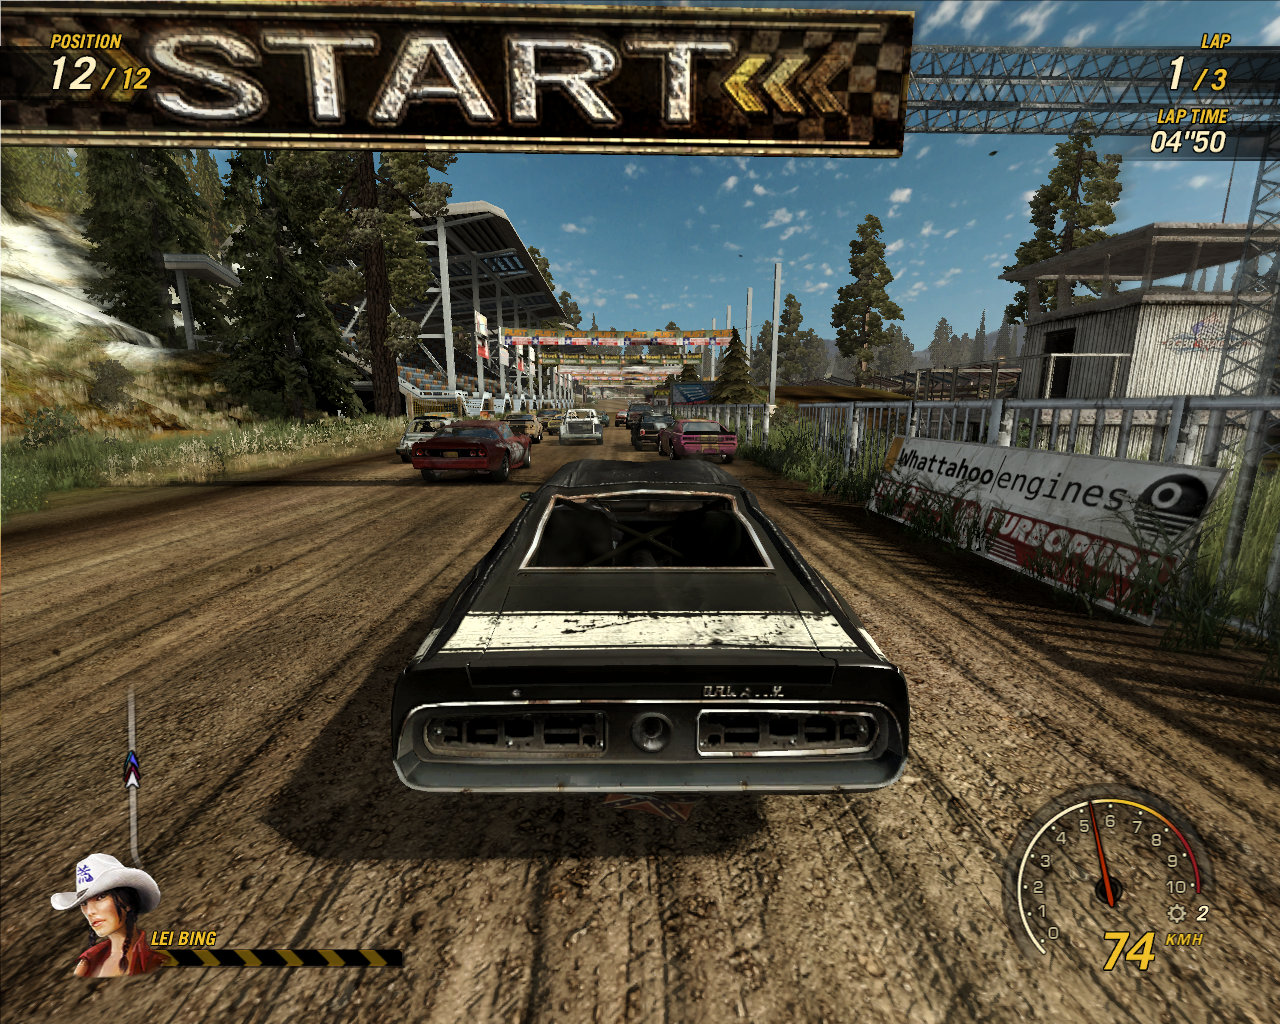 Игра флэт аут. Флатаут 1. FLATOUT: Ultimate Carnage. Флатаут 5. Флэт аут Ultimate Carnage.